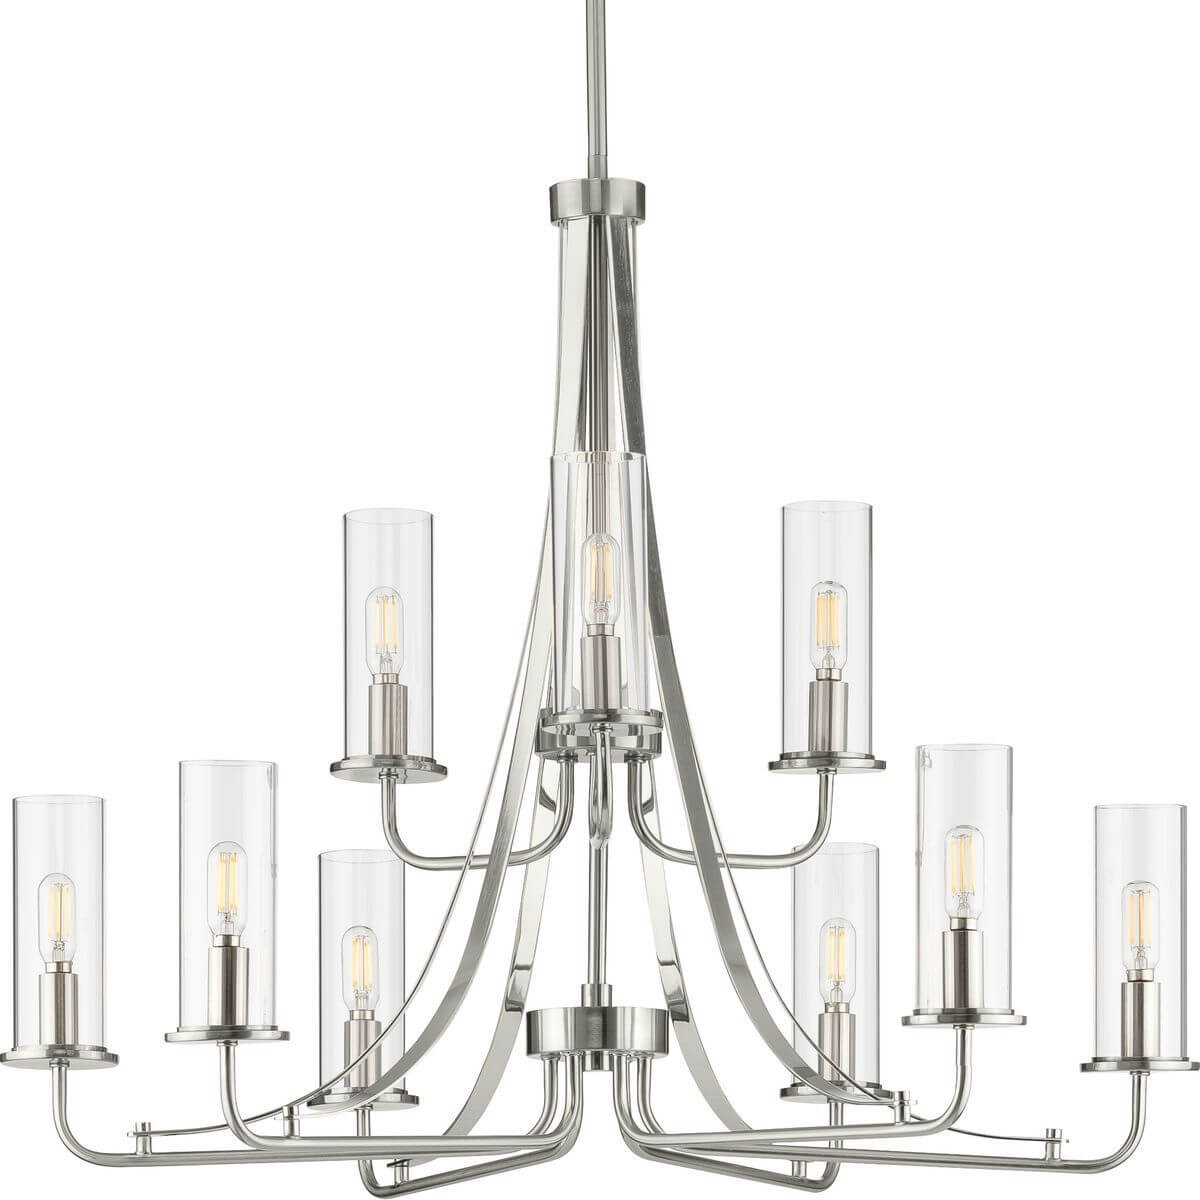 Progress Lighting Riley 9 Light 30 inch Chandelier in Brushed Nickel with Clear Glass P400210-009